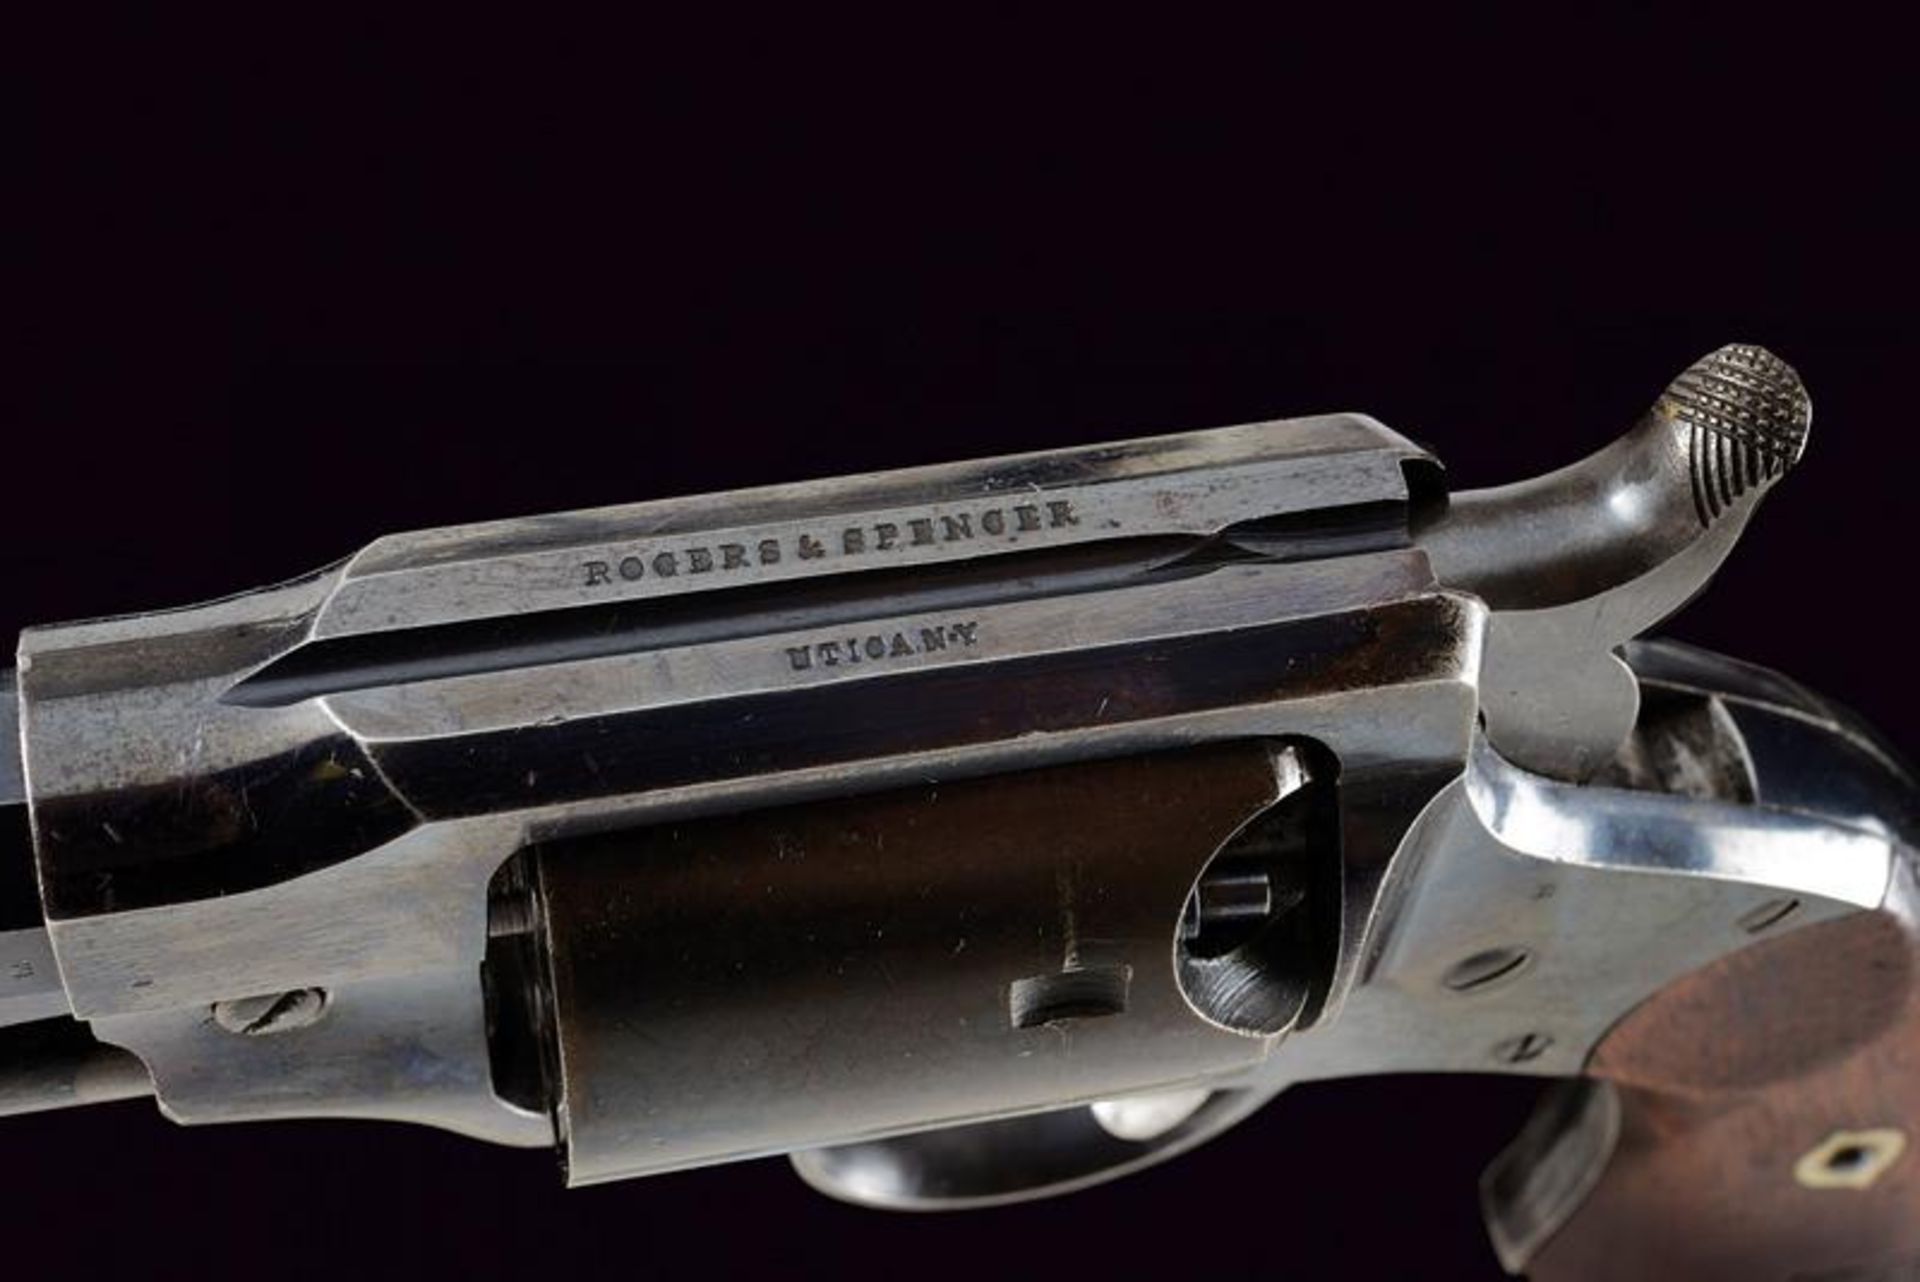 Rogers & Spencer Army Model Revolver - Image 4 of 8